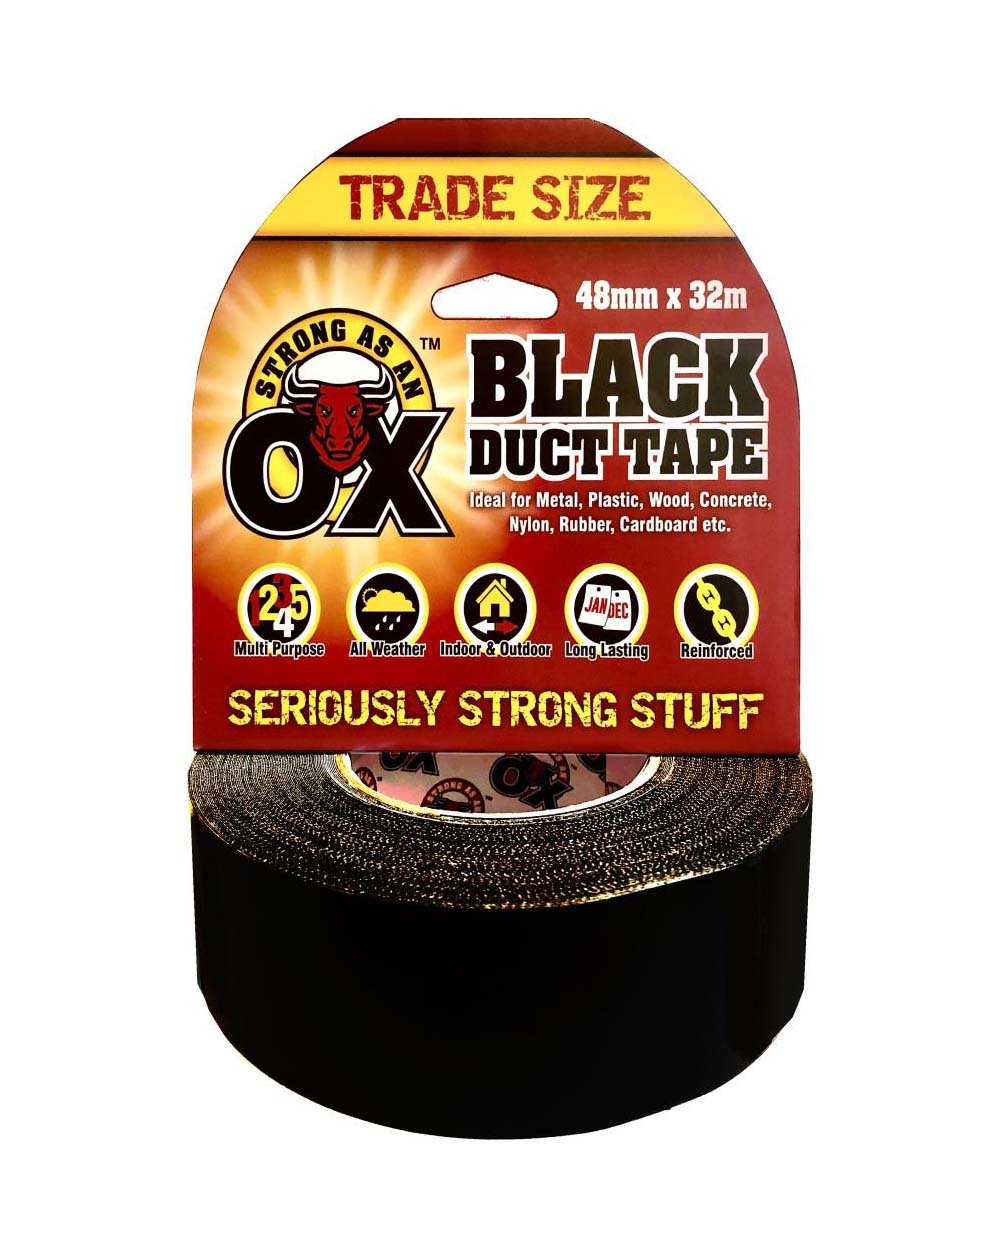 Black Duct Tape Seriously Strong Stuff Indoor Outdoor All Weather Duct Tape 48mm x 32m 3158 (Parcel Rate)